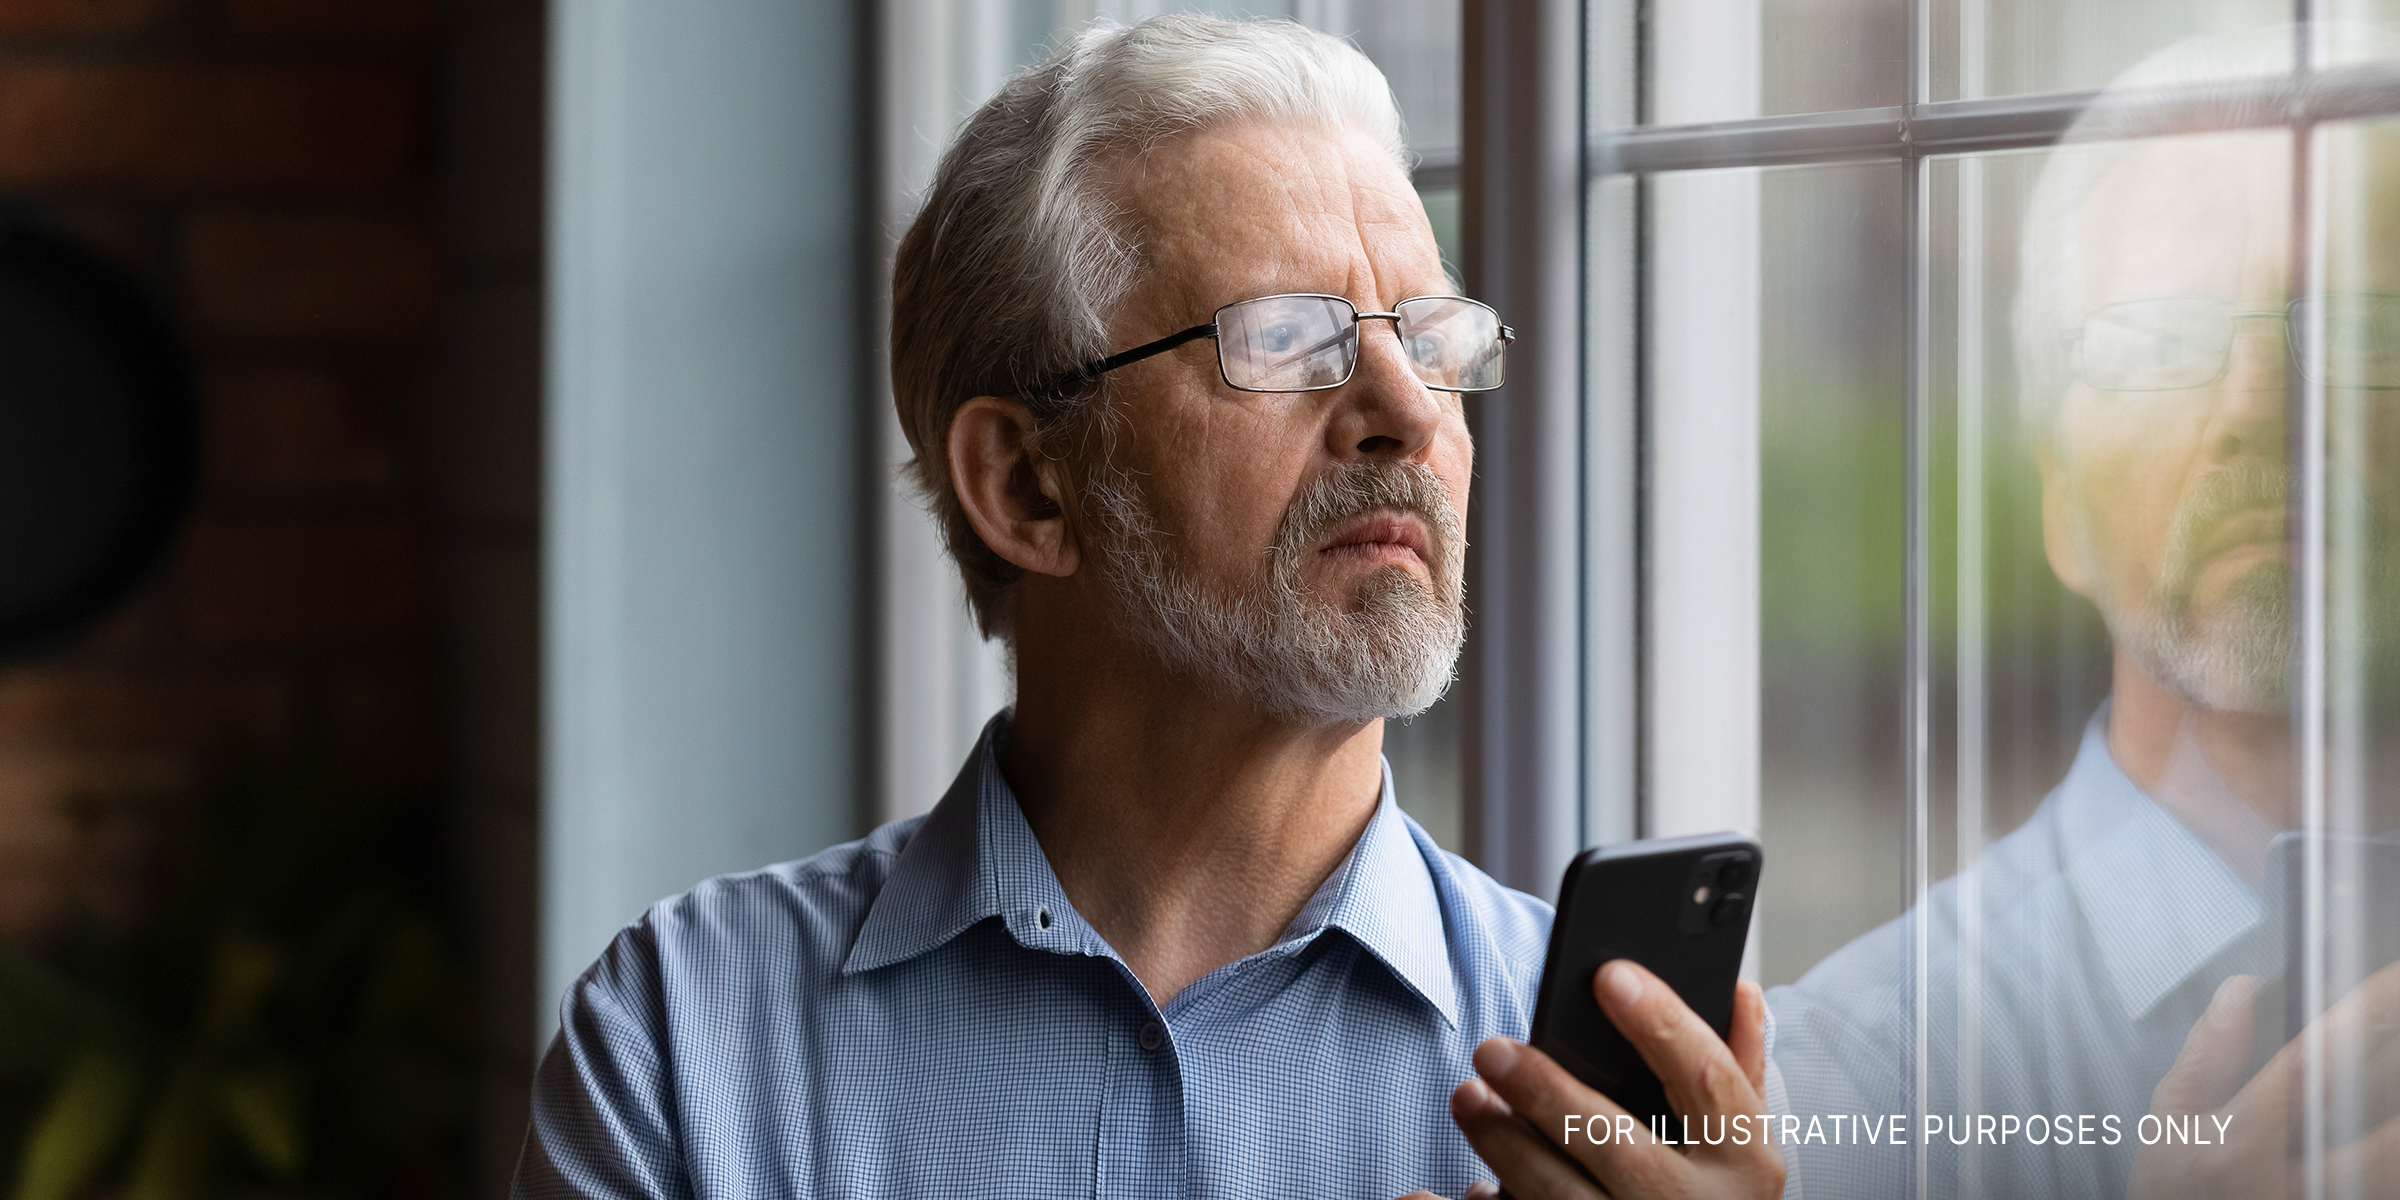 An Older Man Holding a Phone While Standing and Look outside a Window | Source: Shutterstock